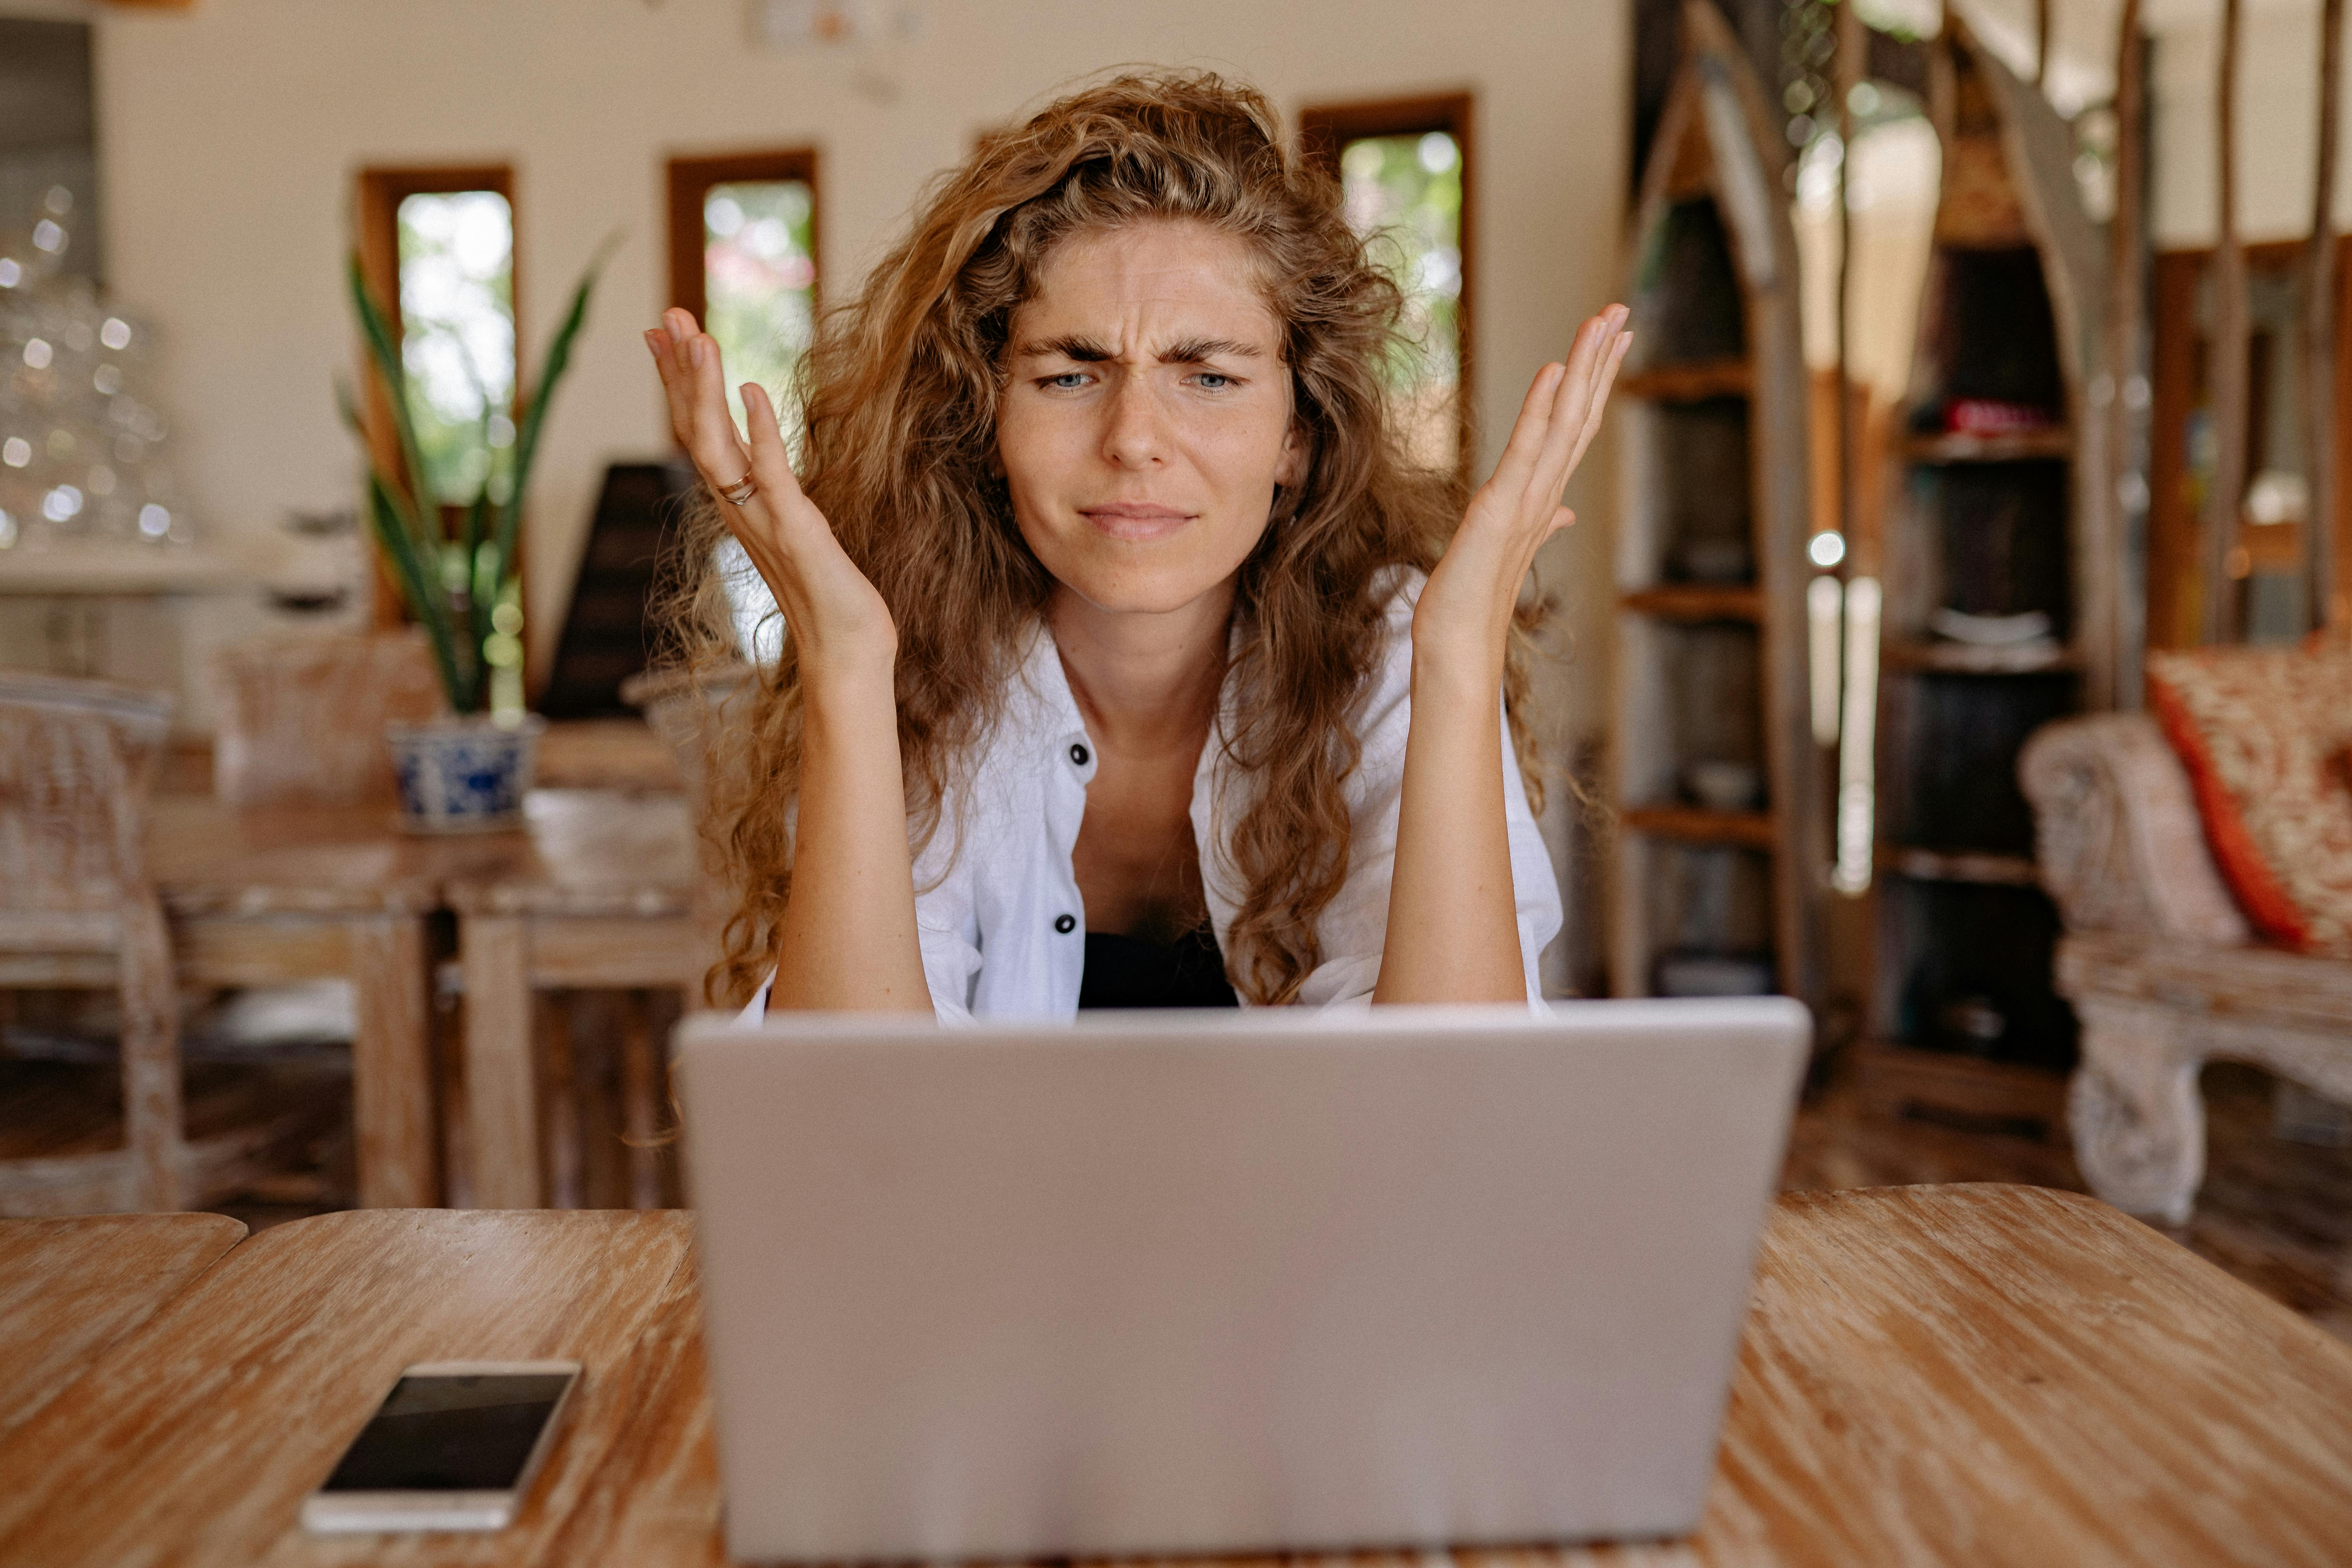 A frustrated woman with her hands up while looking at a laptop screen | Source: Pexels